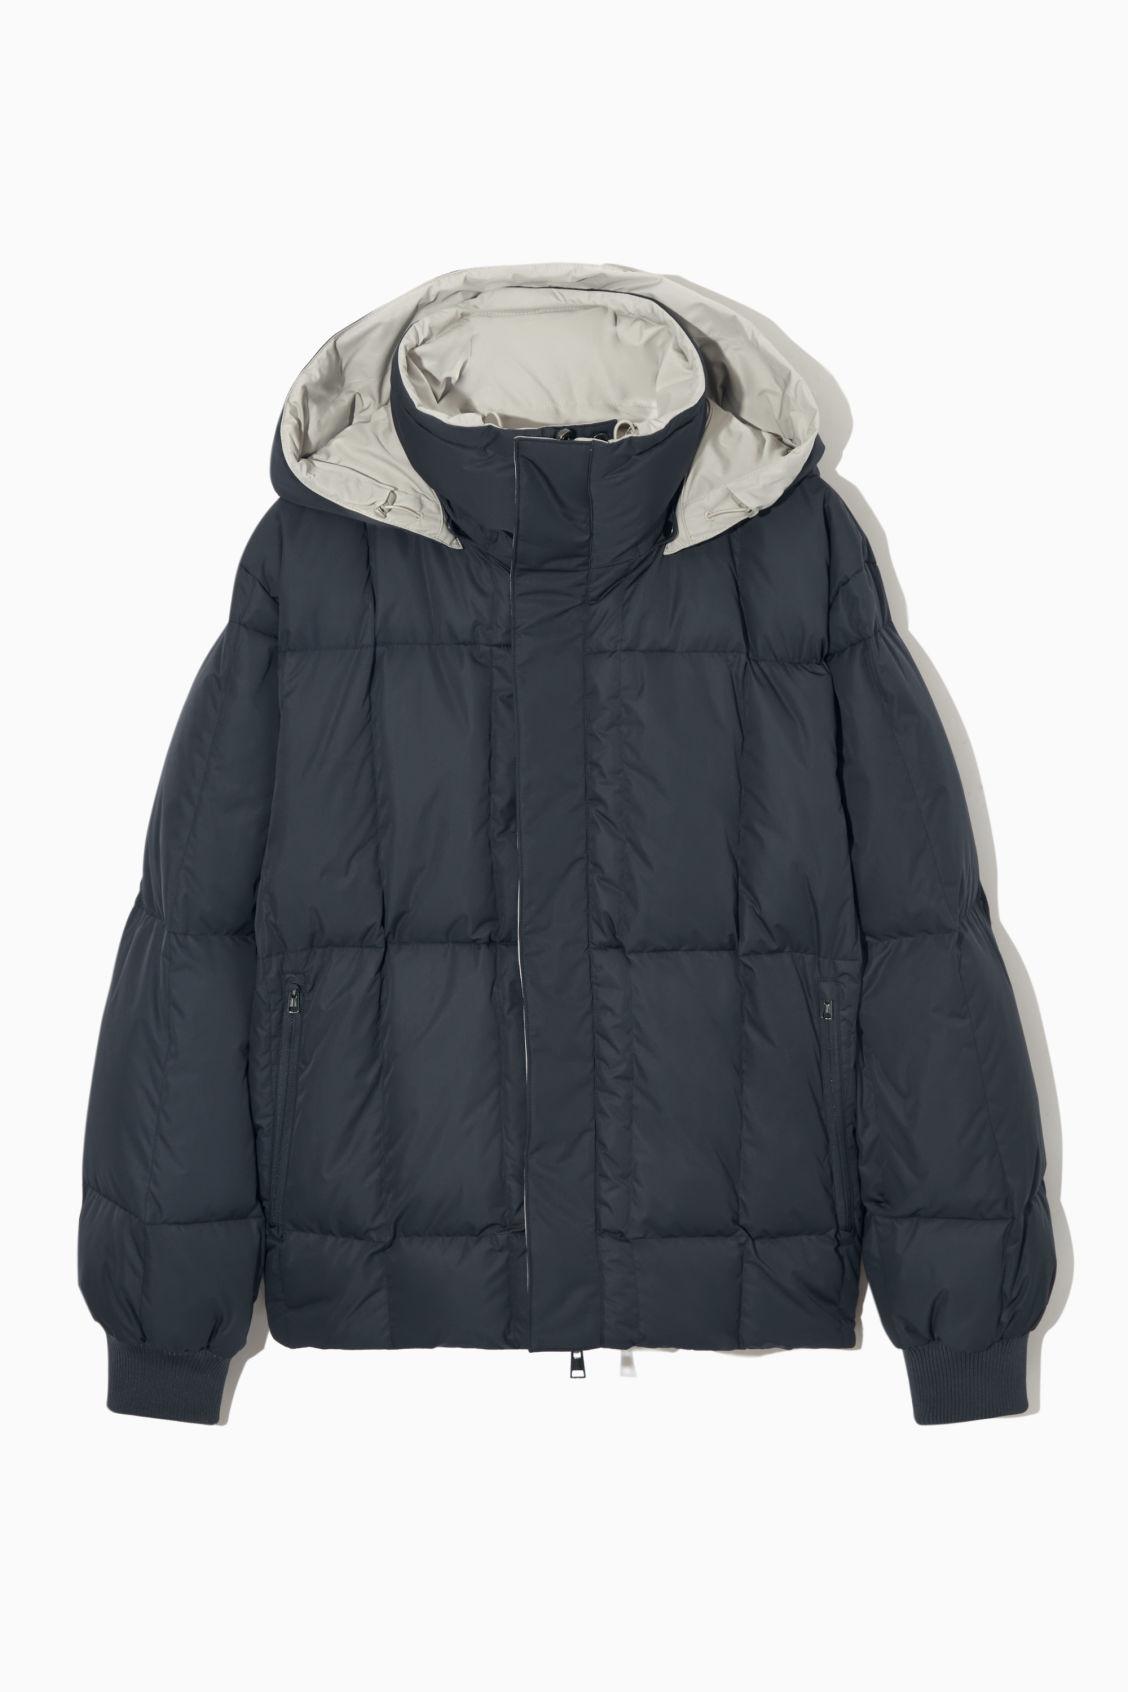 COS Reversible Hooded Puffer Jacket in Blue for Men | Lyst